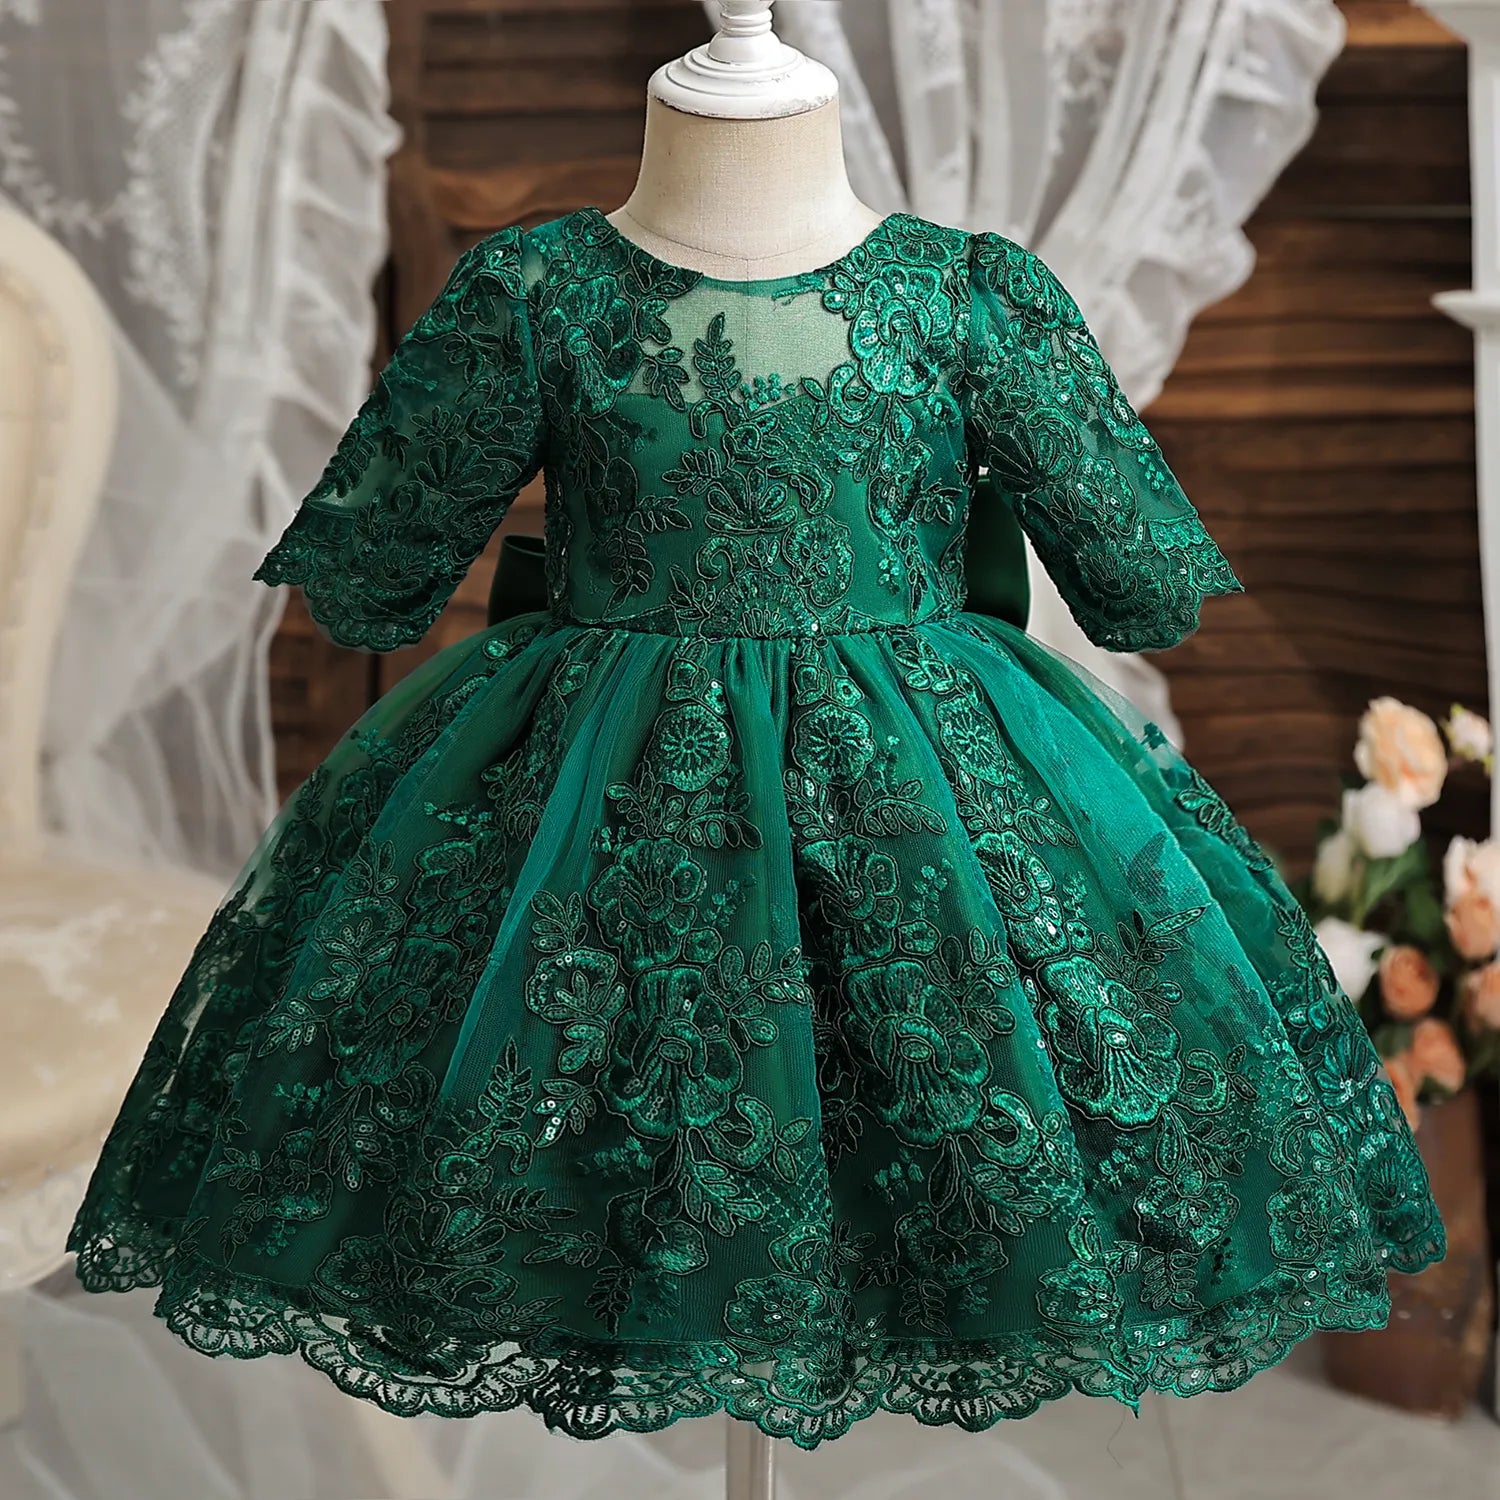 Lace Overlay Green Holiday Dress 3/4 sleeve